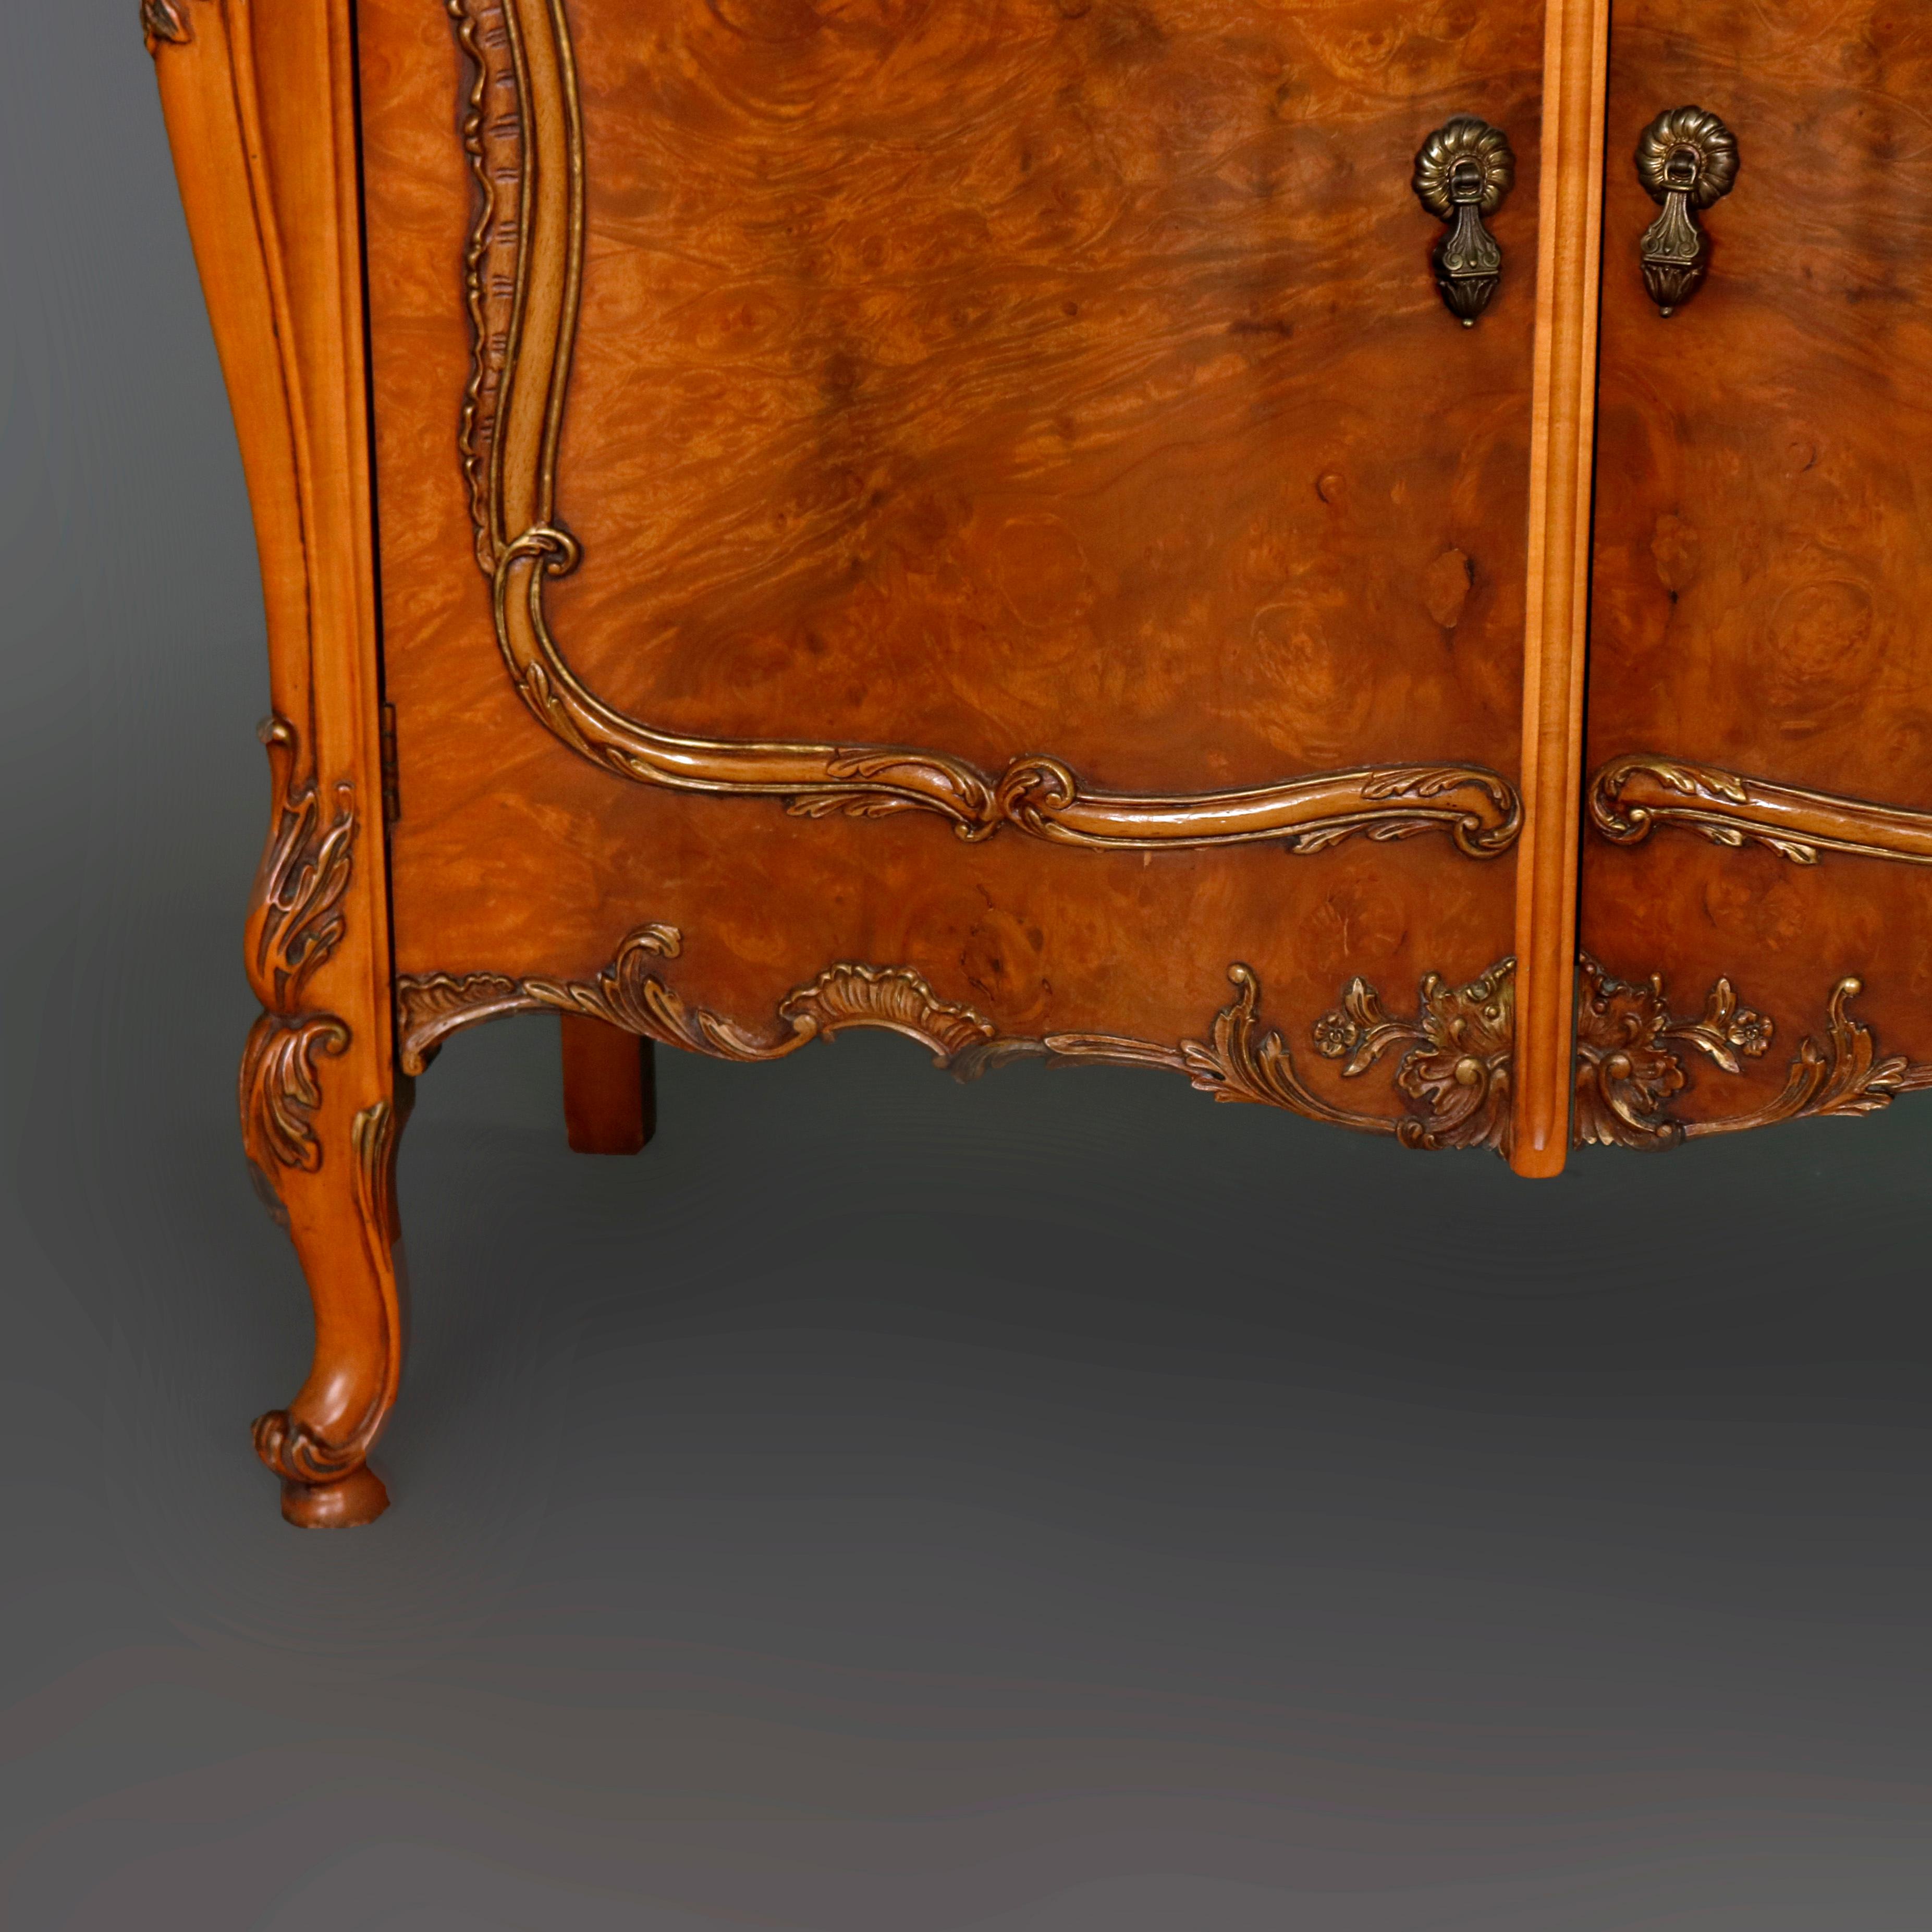 Birdseye Maple Antique French Louis XV Style Maple and Burl Credenza by American Furniture